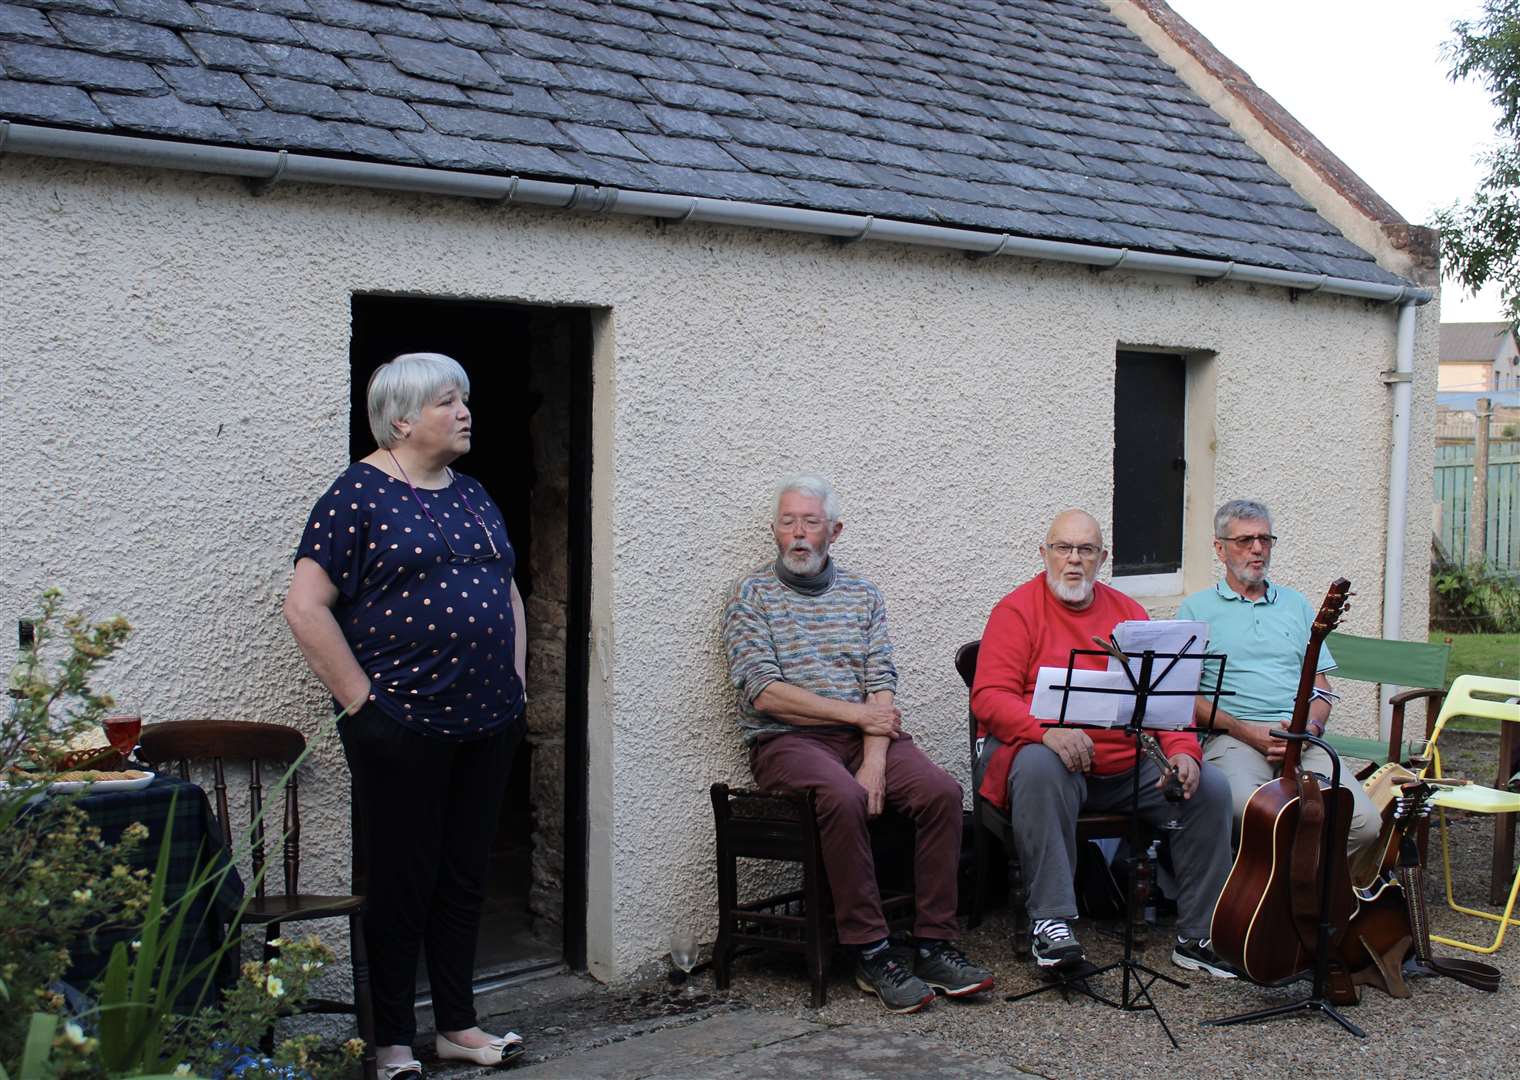 Turriff And District Heritage Society held a concert for members.